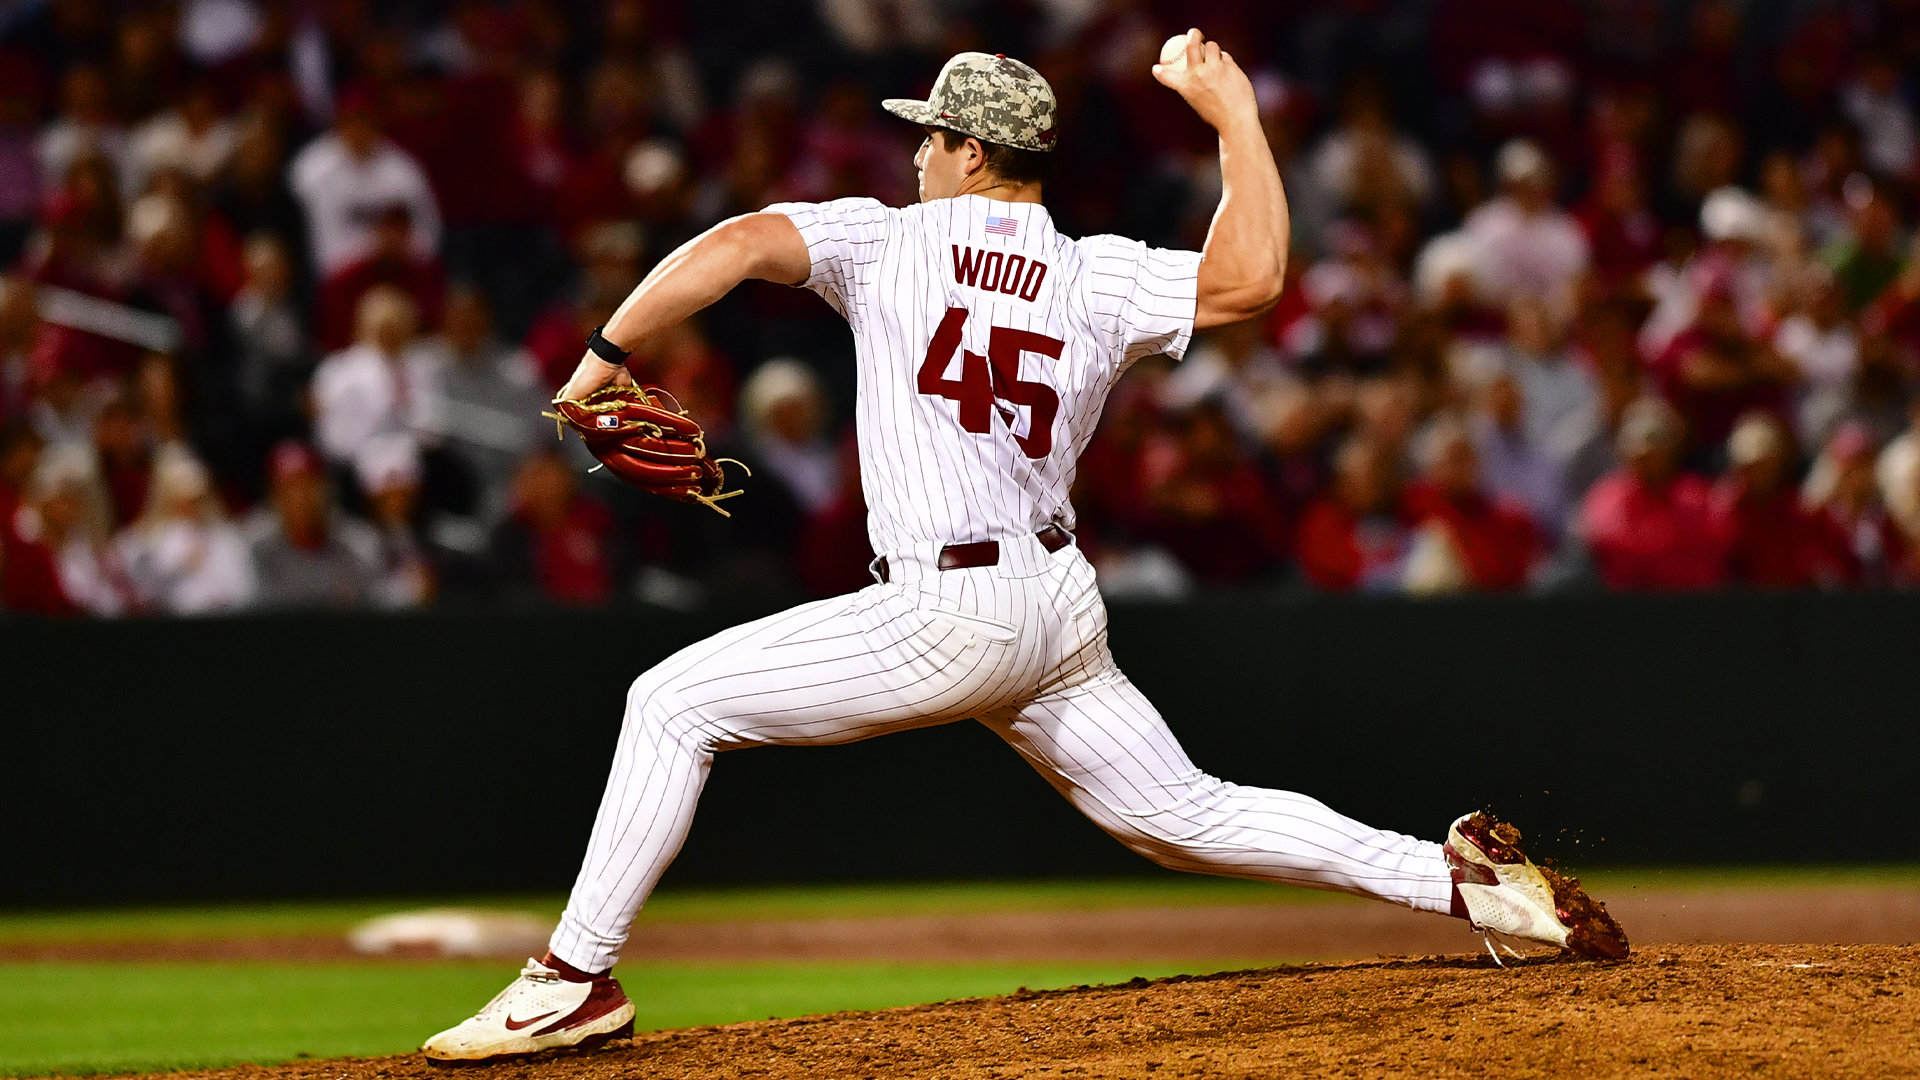 #1 Arkansas Clinches Series Win over Ole Miss behind Aloy, Wood’s Strong Efforts